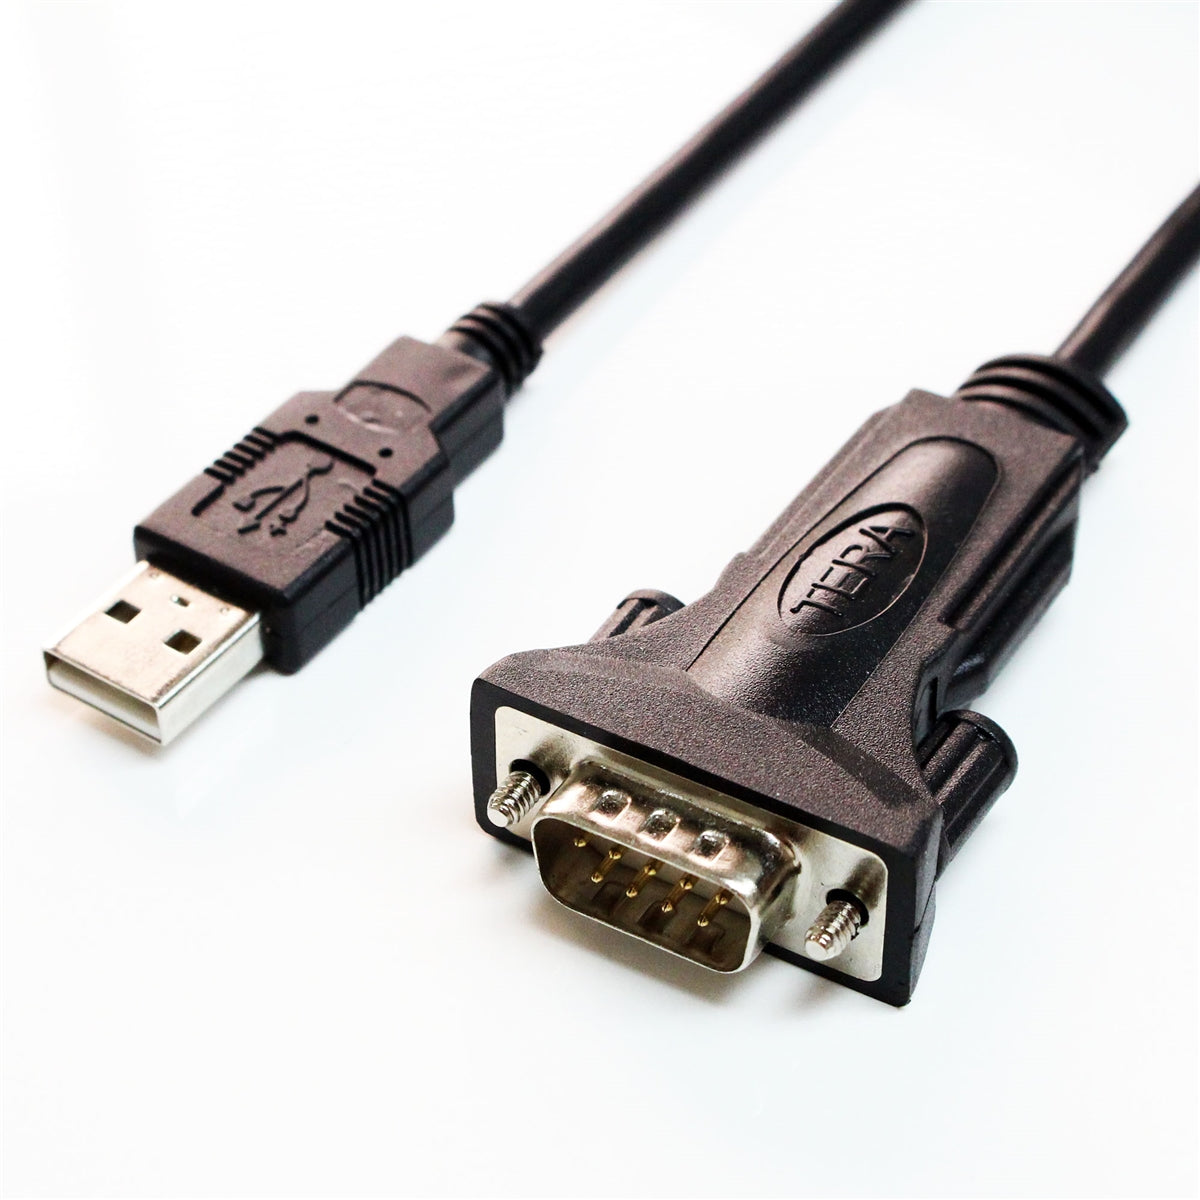 gås Væsen social Tera Grand - 6 FT USB 2.0 to RS232 Serial DB9 Cable with Thumbscrews